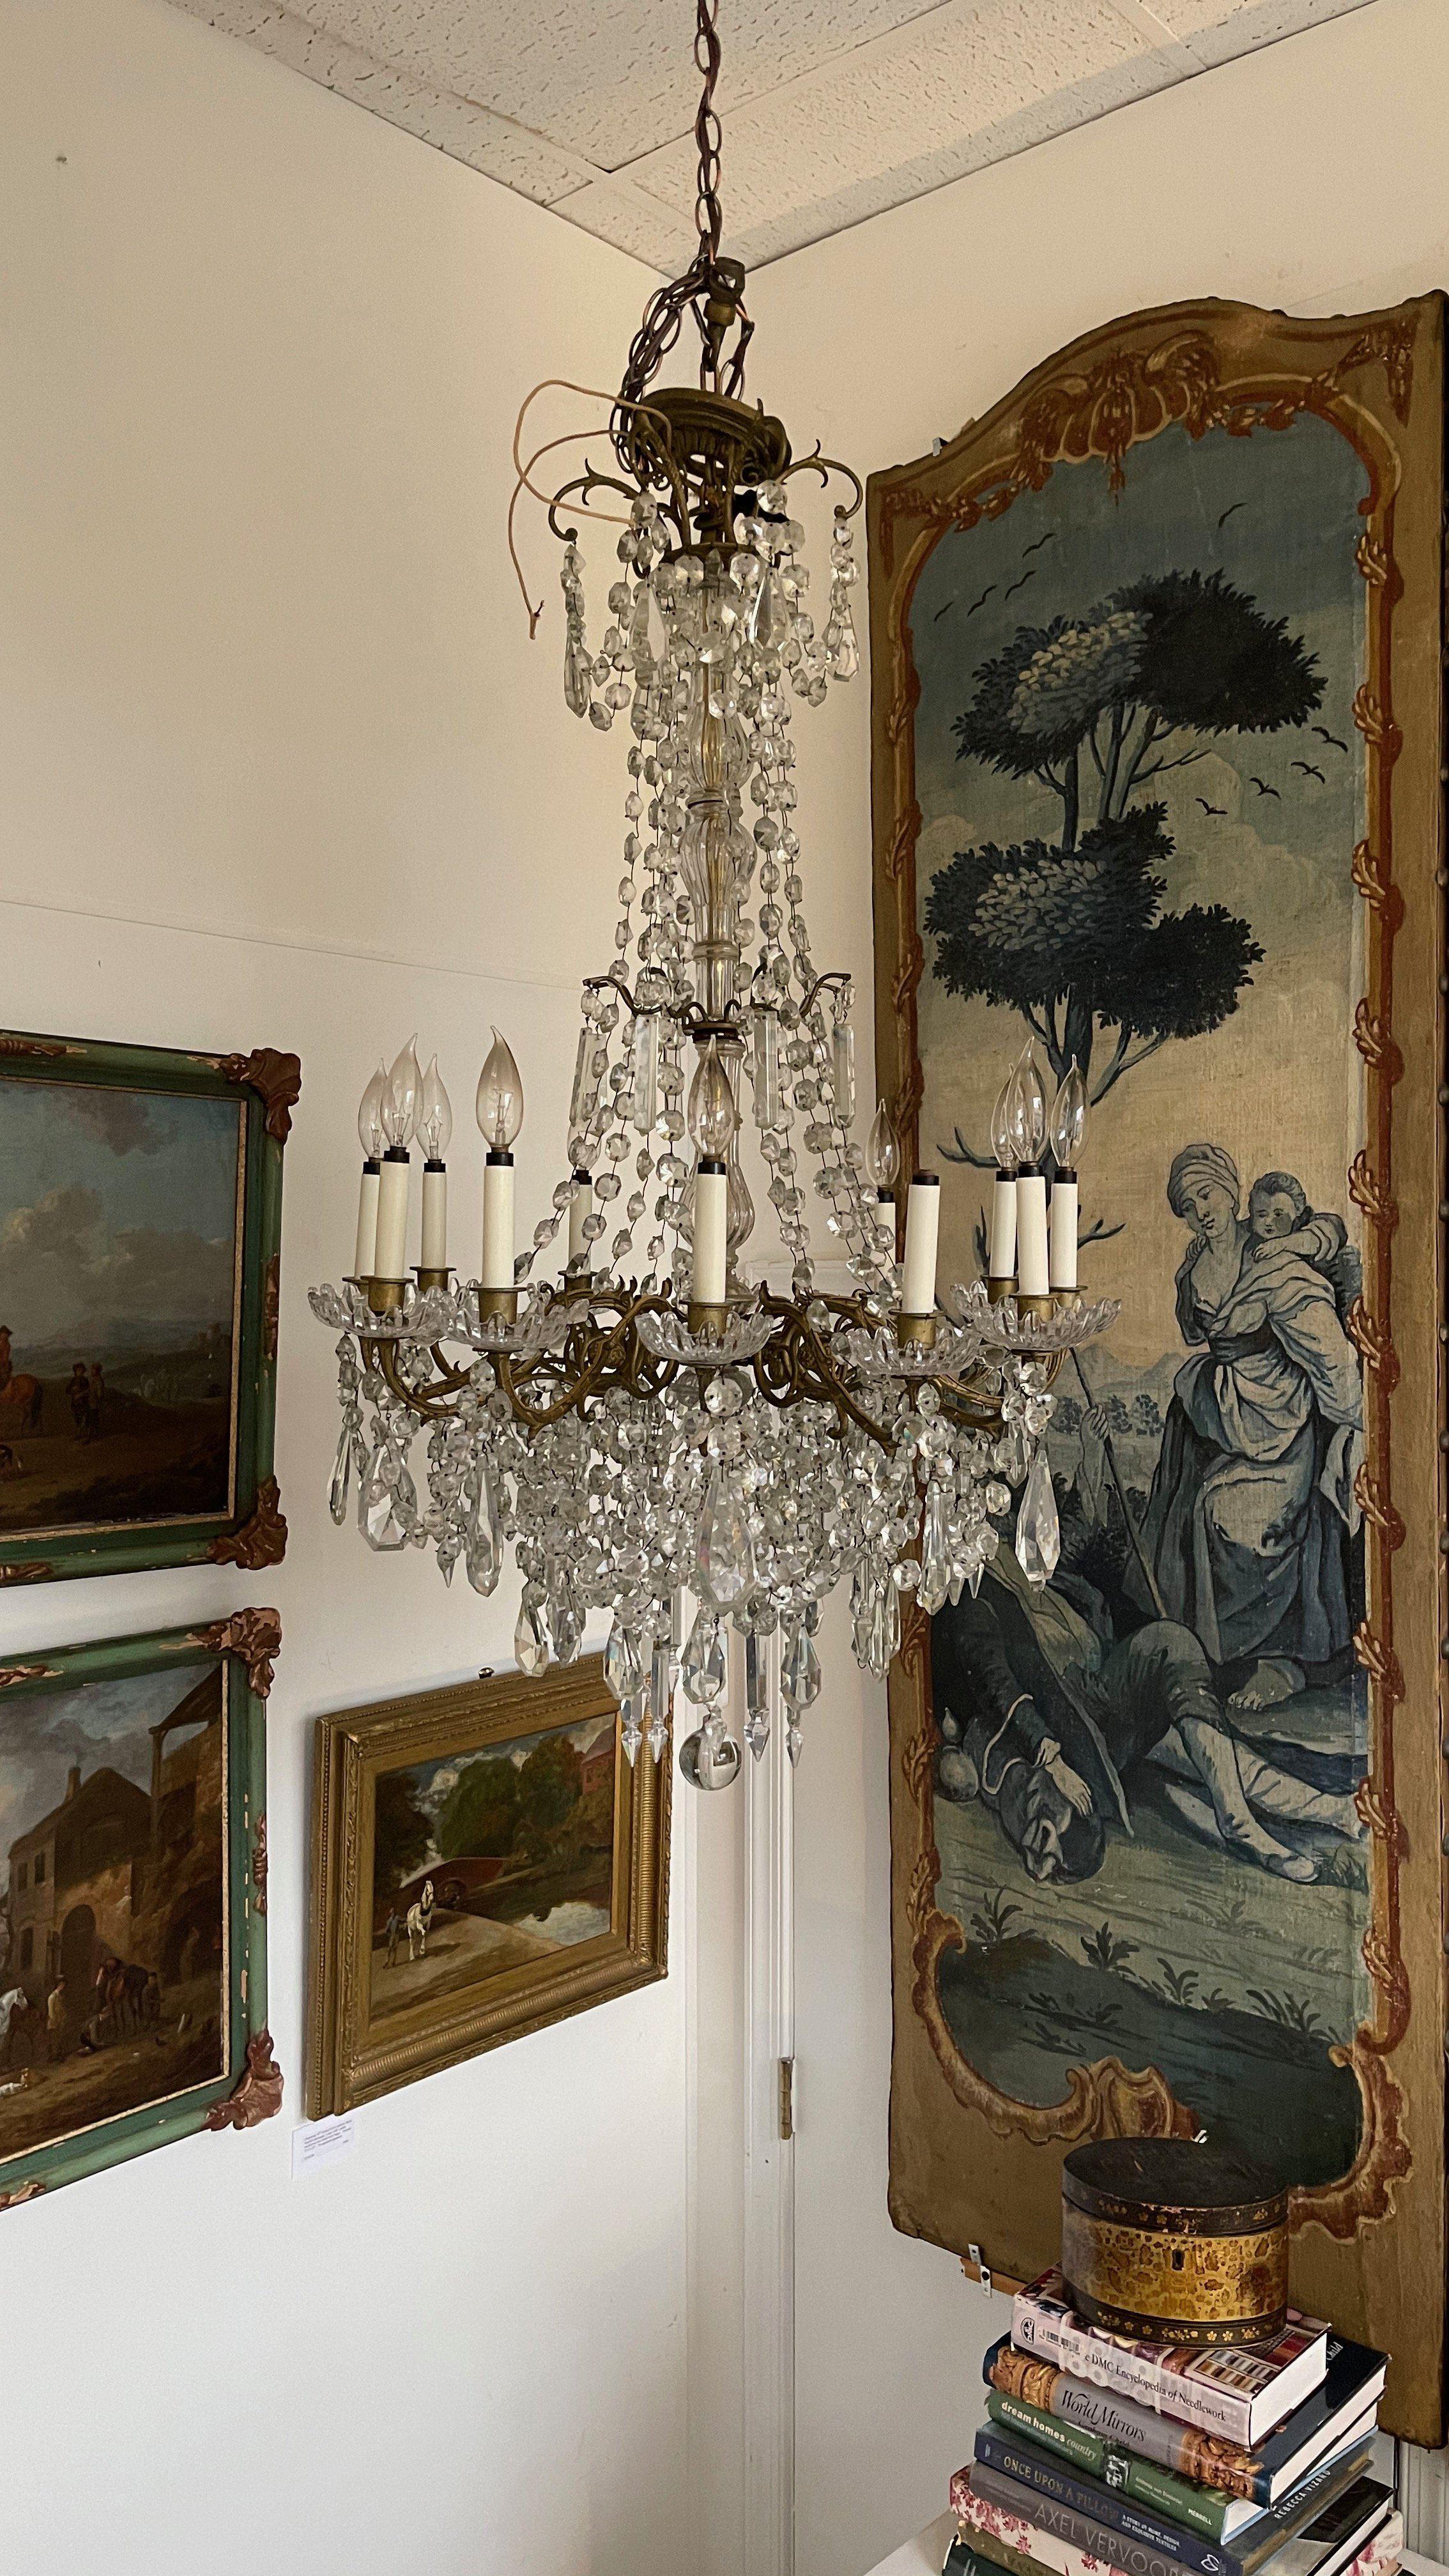 Nineteenth century French bronze doré crystal chandelier, electrified, c. 1880. Likely Baccarat. Imported through New Orleans, for the historic J.E.A. Davidson -- C.W. Thomas House, built in 1859, in Quincy, Florida, built by J.E.A. Davidson, who